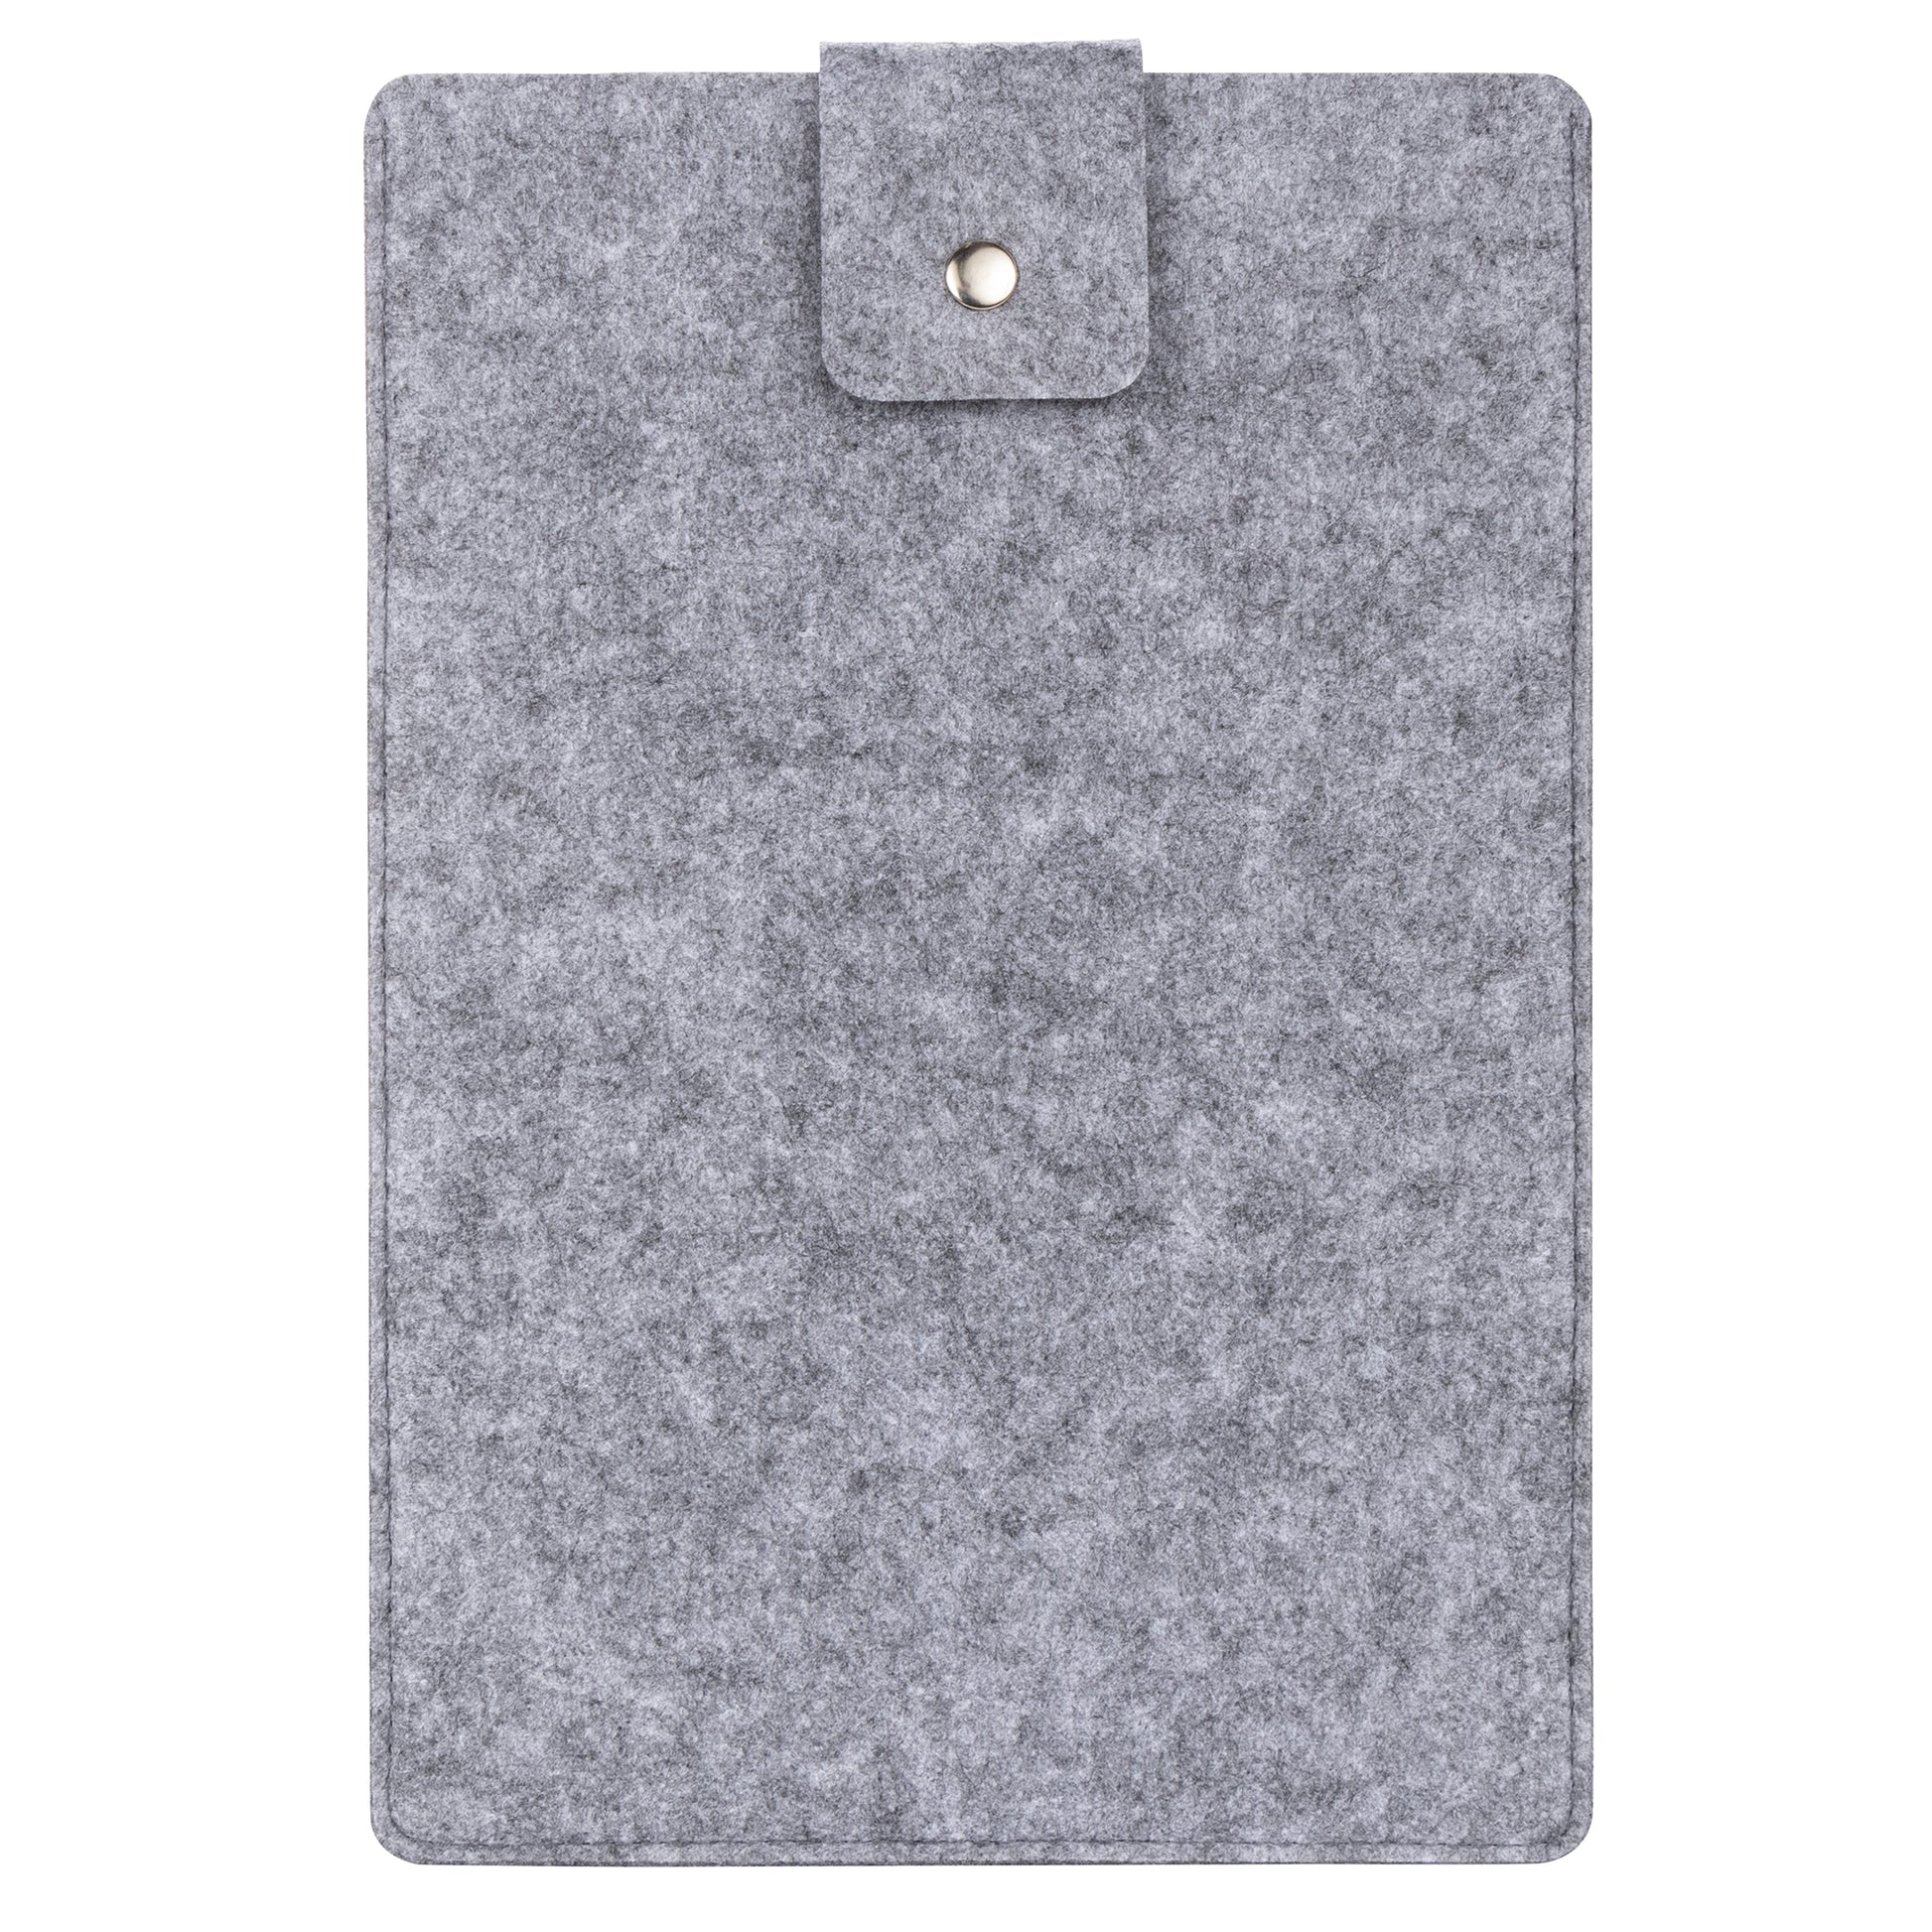 Light Gray Felt Tablet Sleeve Carrying Case - front view with snap